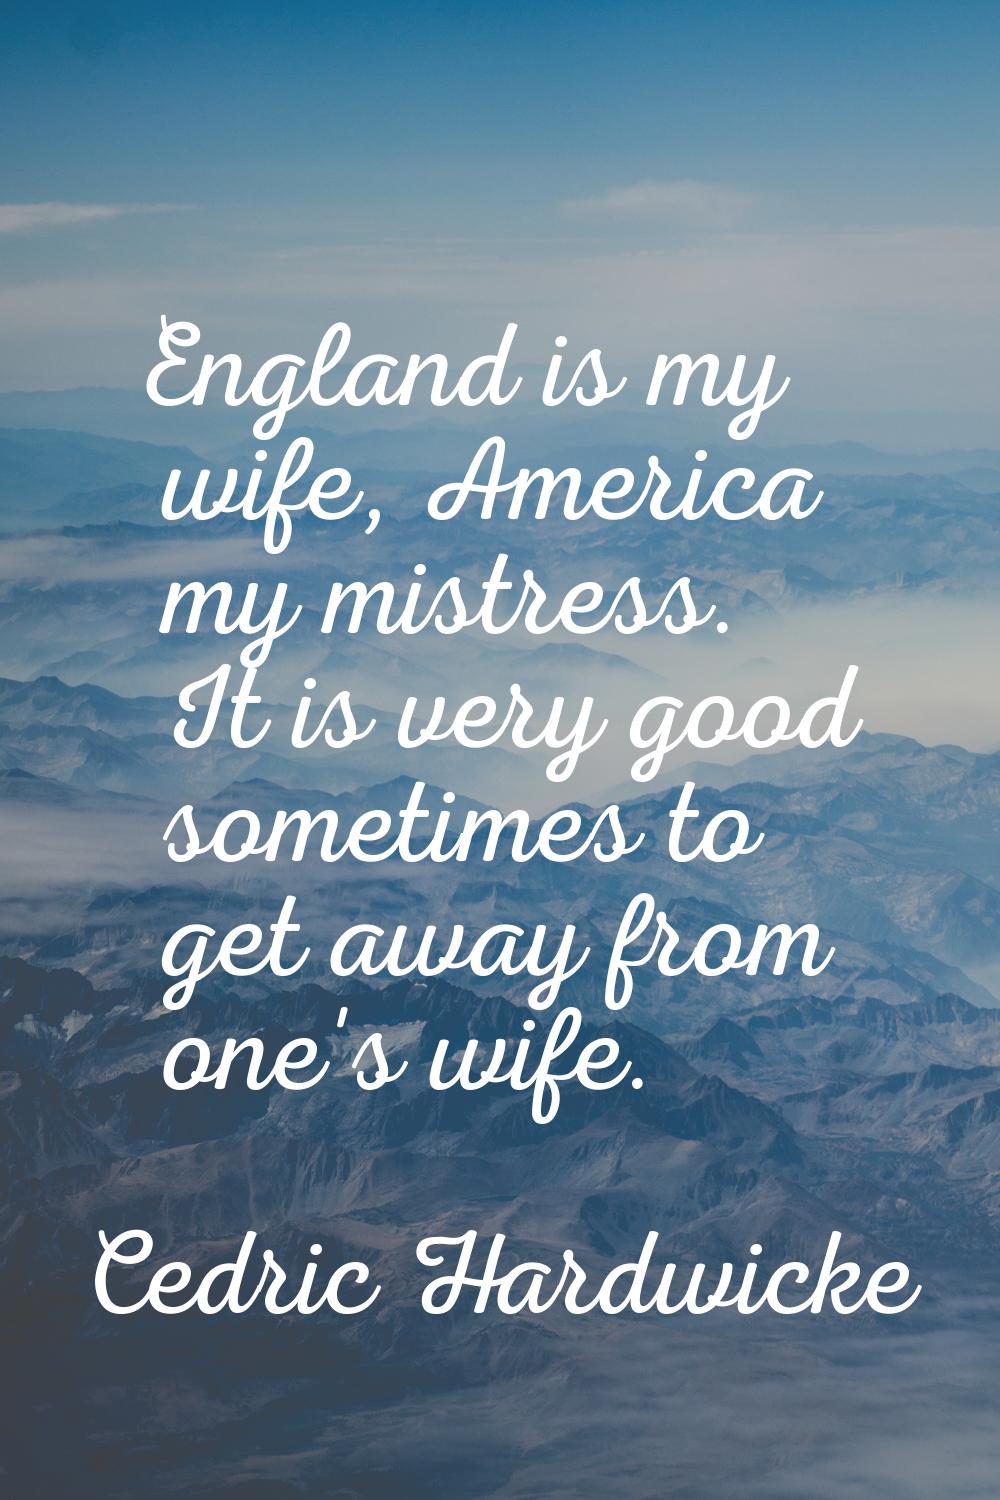 England is my wife, America my mistress. It is very good sometimes to get away from one's wife.